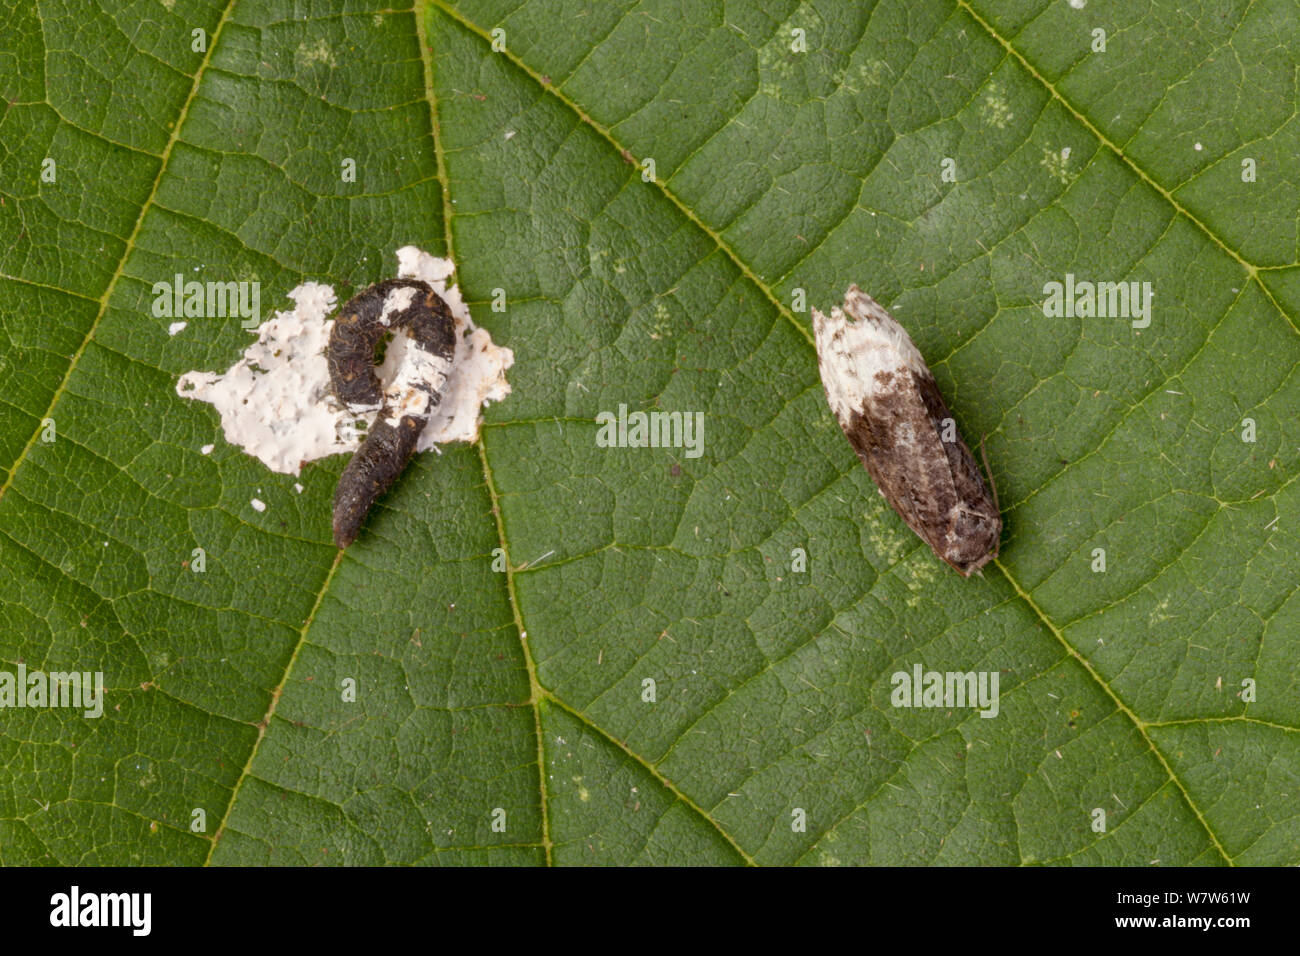 Birch Marble (Apotomis betuletana) (right) next to a bird dropping. This moth is an excellent bird-dropping mimic, giving it protection from predators. Surrey, UK. August. Stock Photo